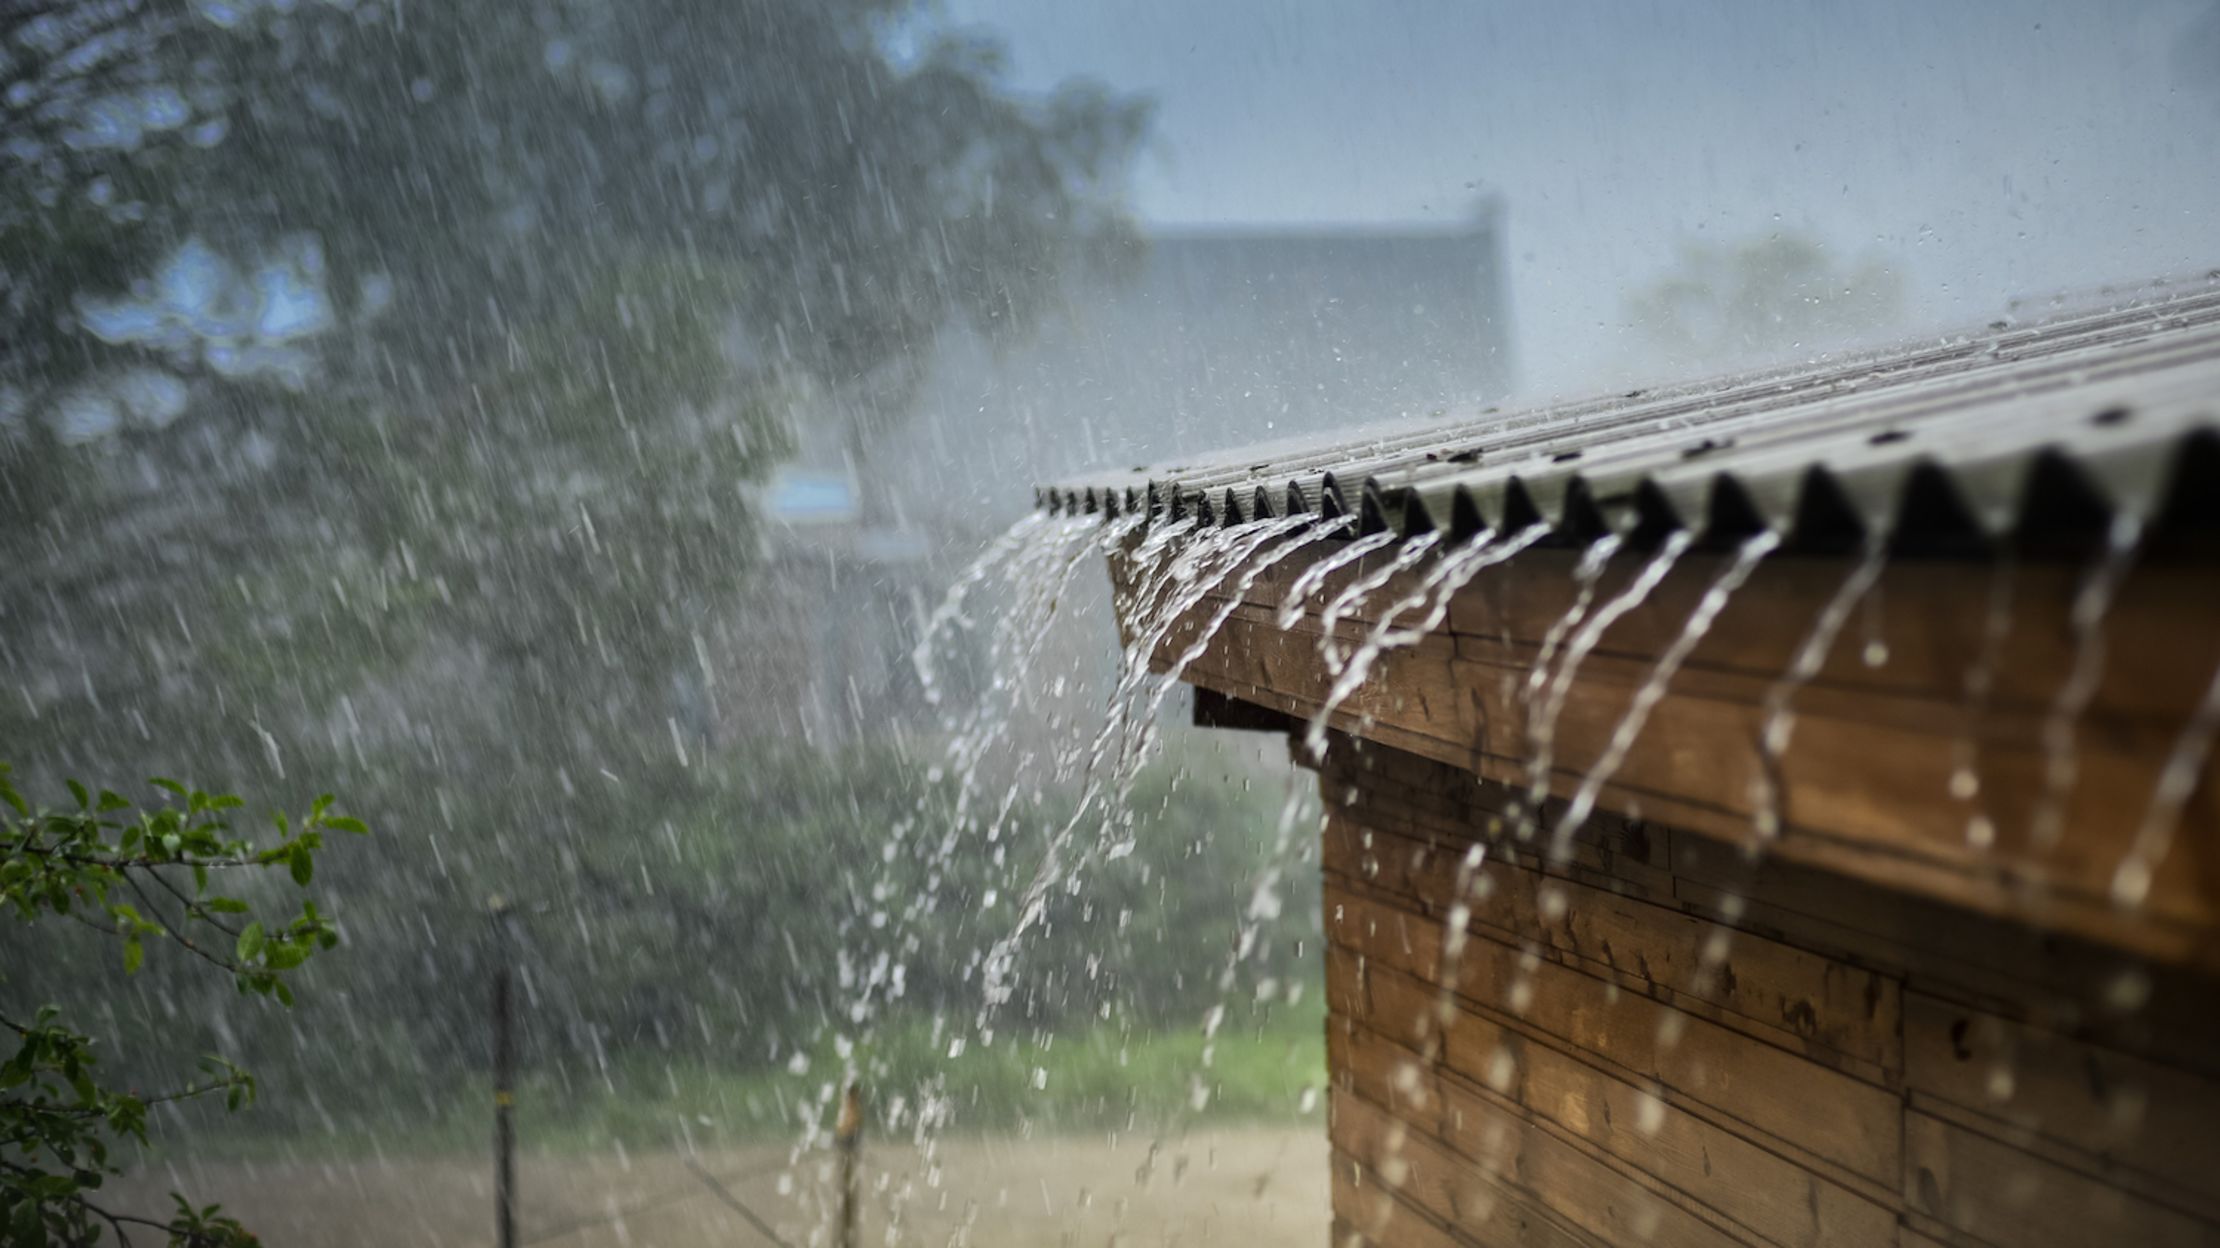 7 Smart Steps You Can Take to Weatherproof Your Home | Mental Floss